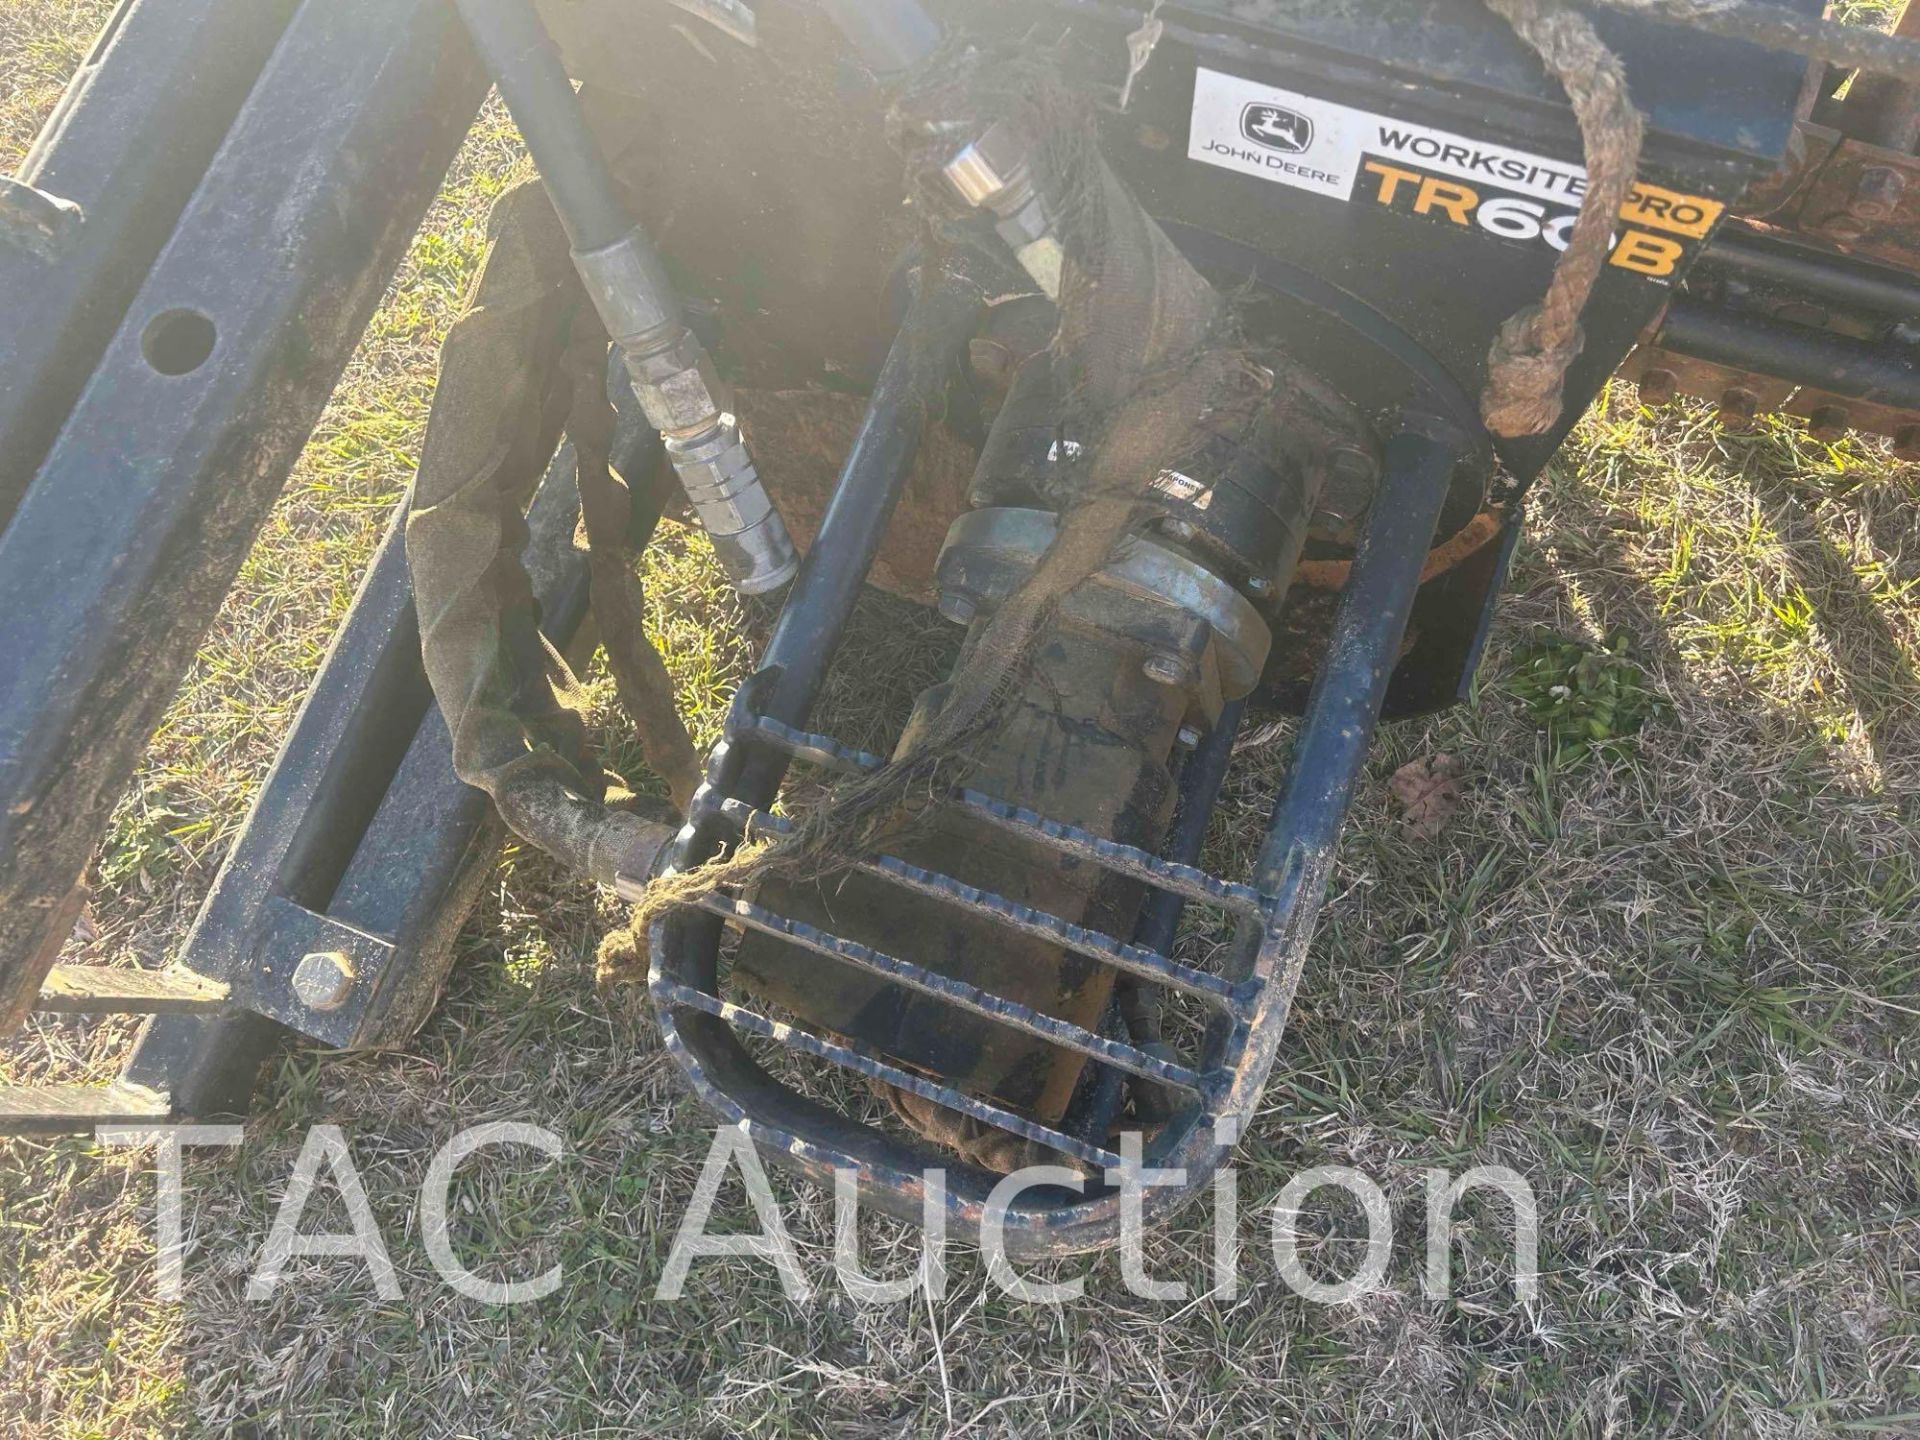 John Deere Work Site Pro TR60B Hydraulic Trencher Attachment - Image 8 of 10